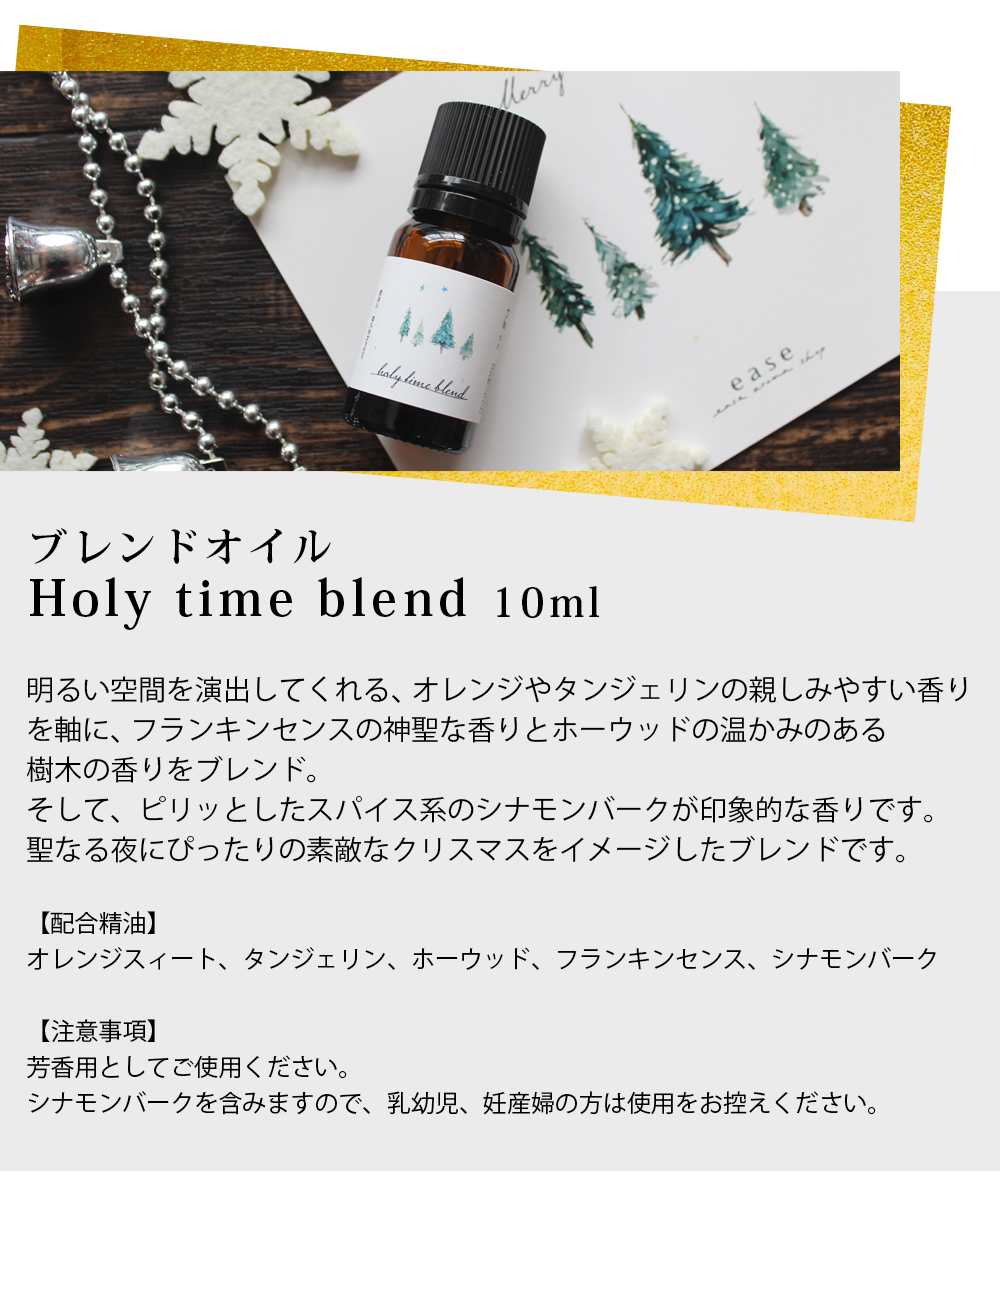 holy time blend